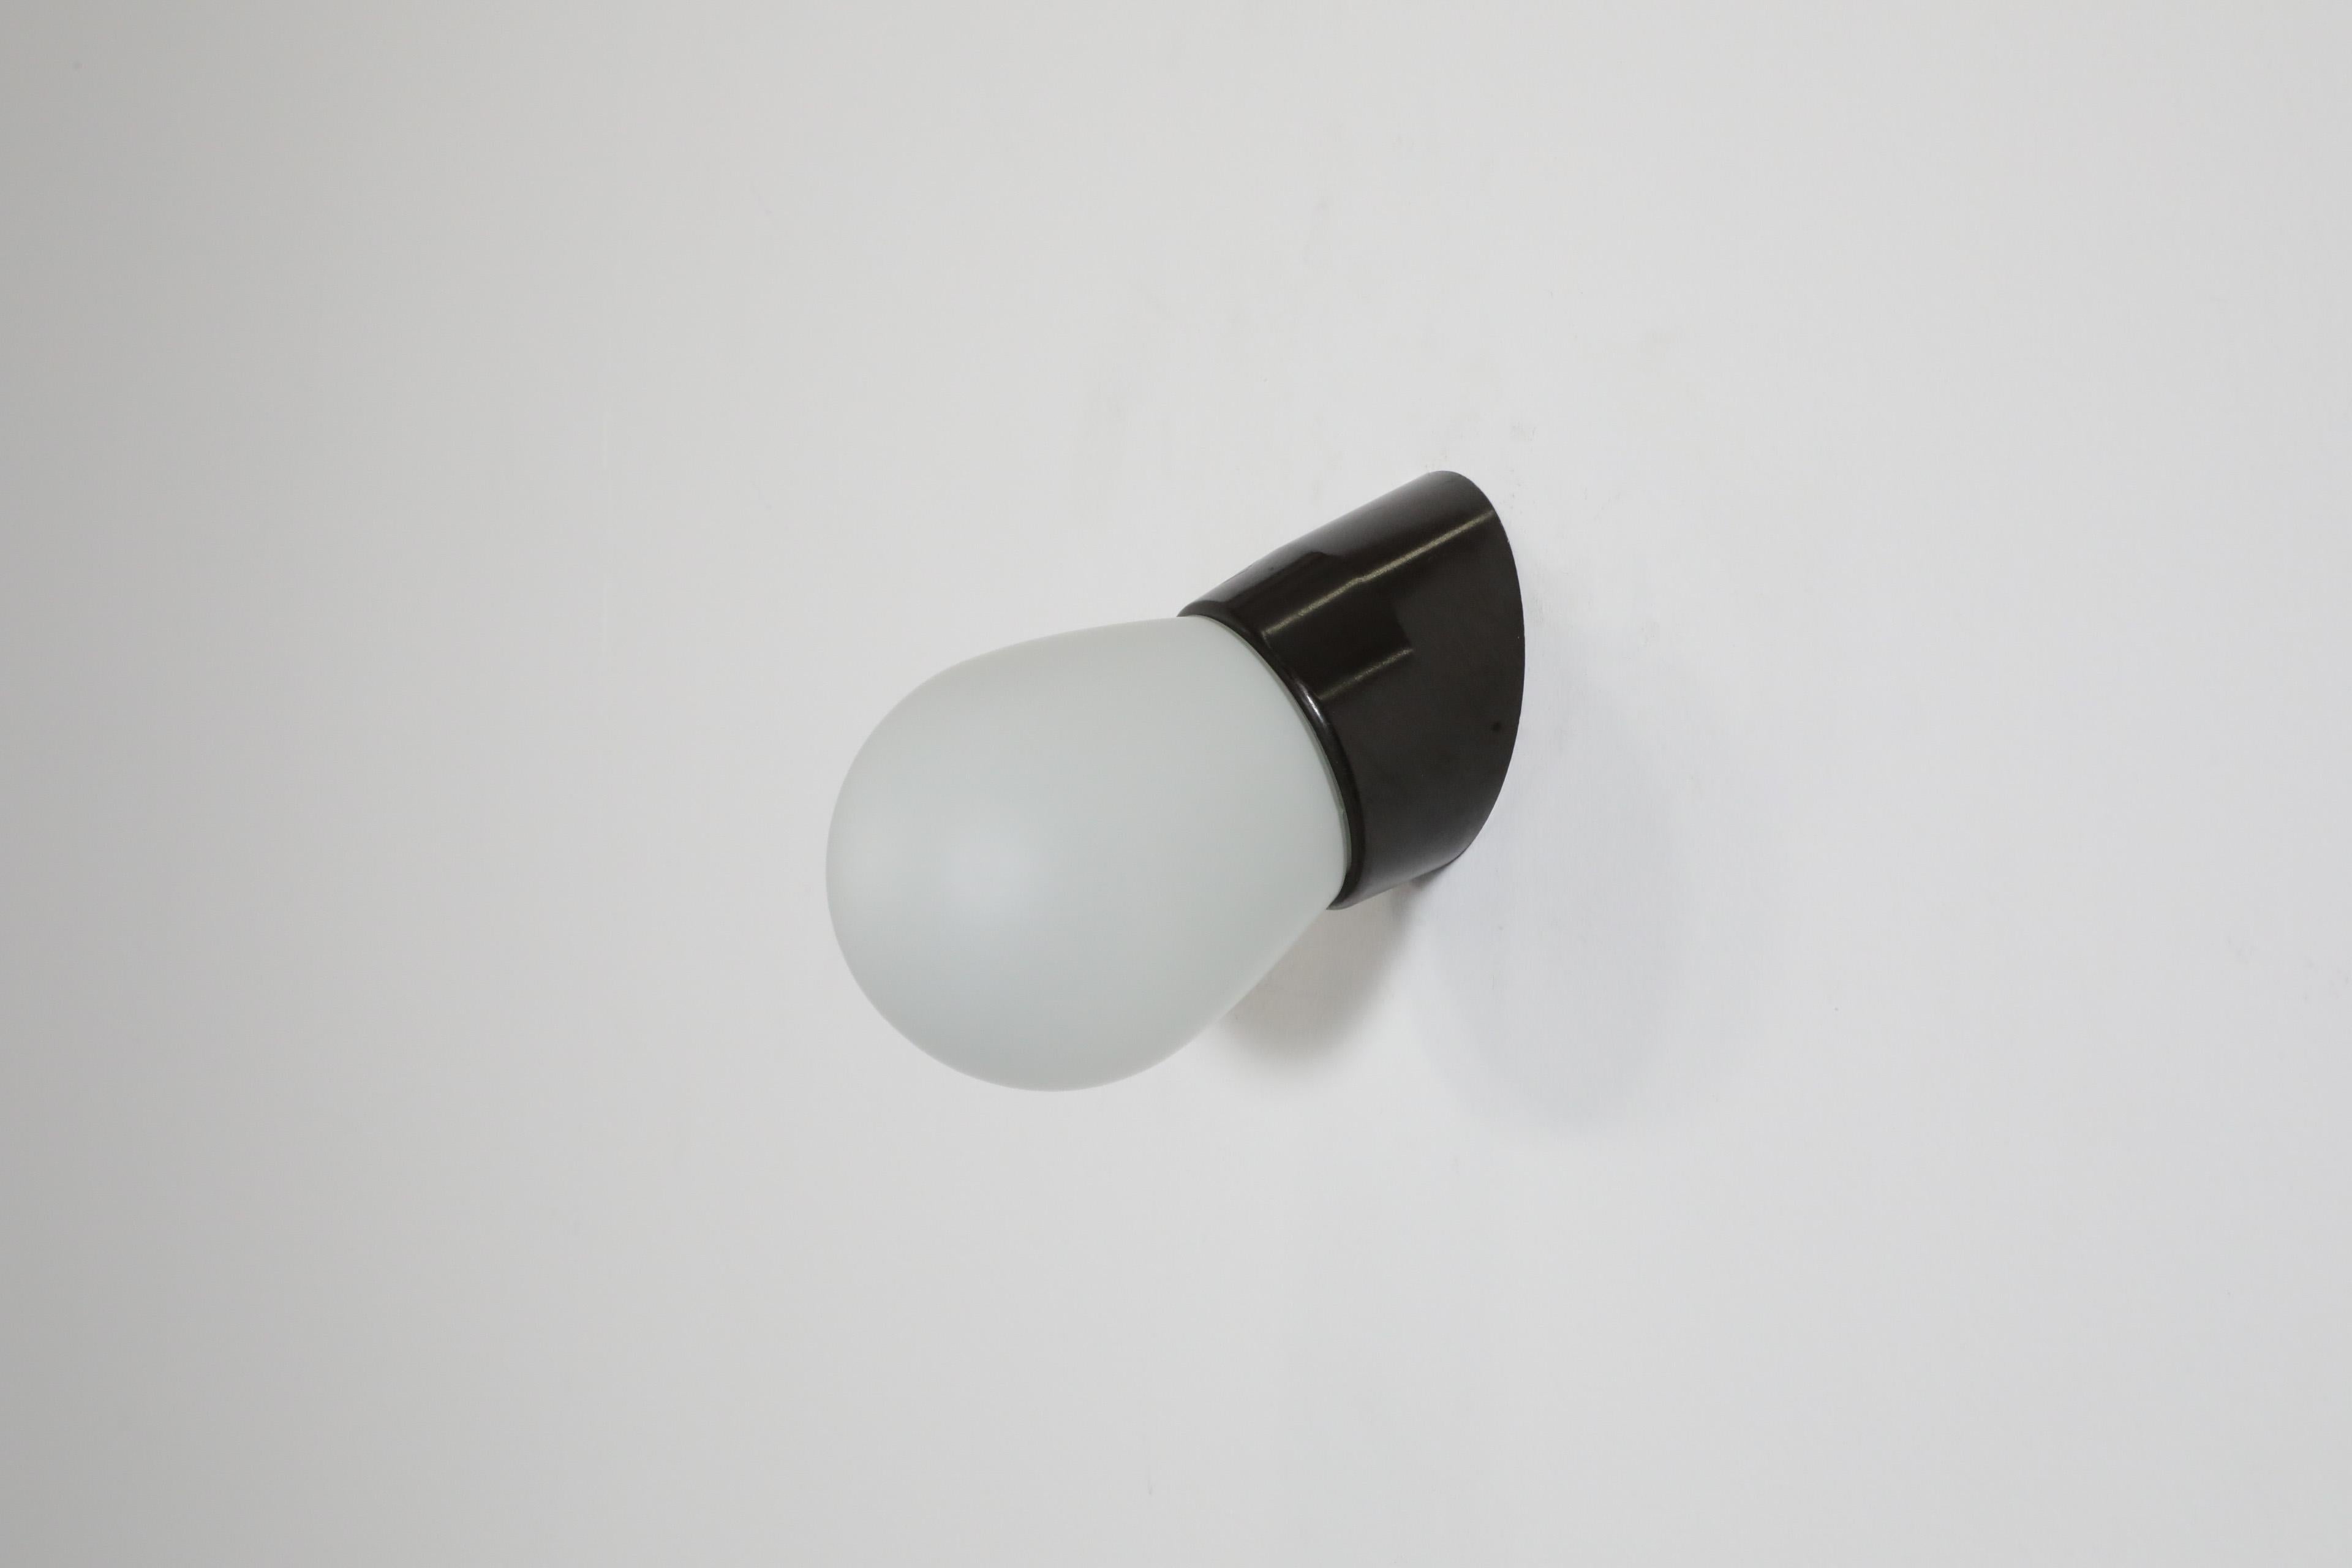 Mid-20th Century Retro Mid-Century Frosted Bulbous Glass Sconce with Angled Black Bakelite Base For Sale